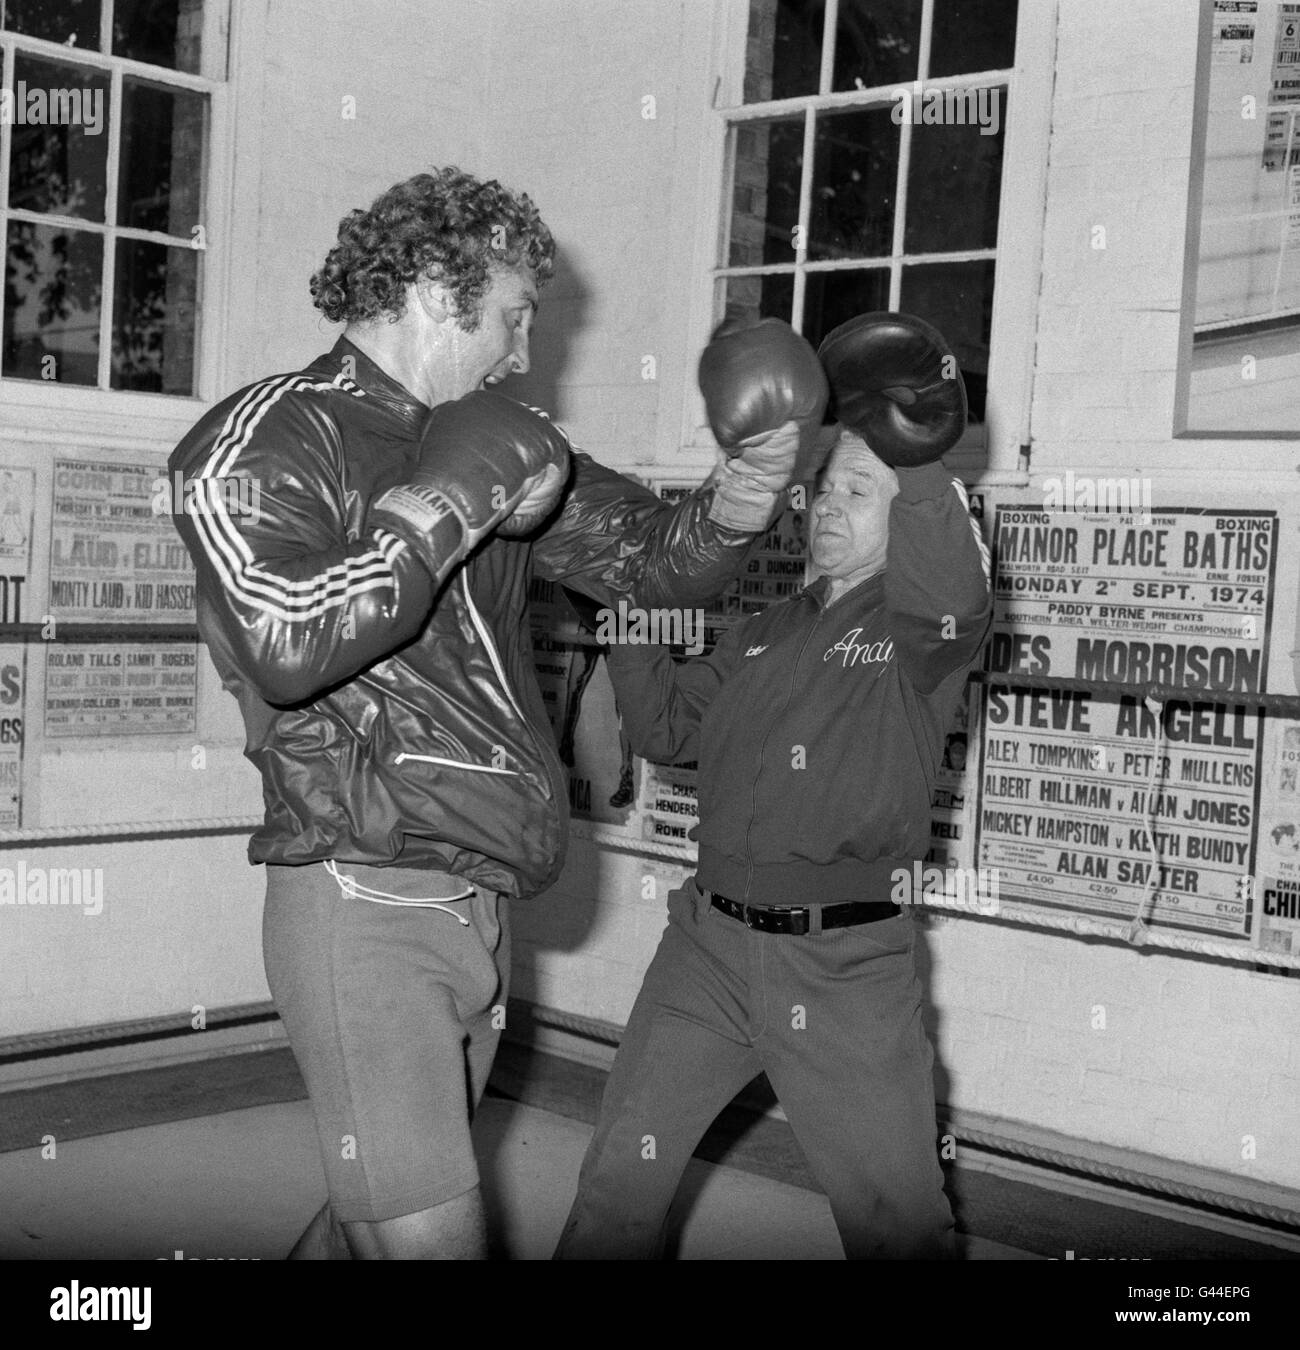 British Heavyweight Joe Bugner (l) spars with his manager Andy Smith (R) in  preparation for his EBU (European), Commonwealth (British Empire) and  BBBofC British heavyweight titles fight with Richard Dunn. This would